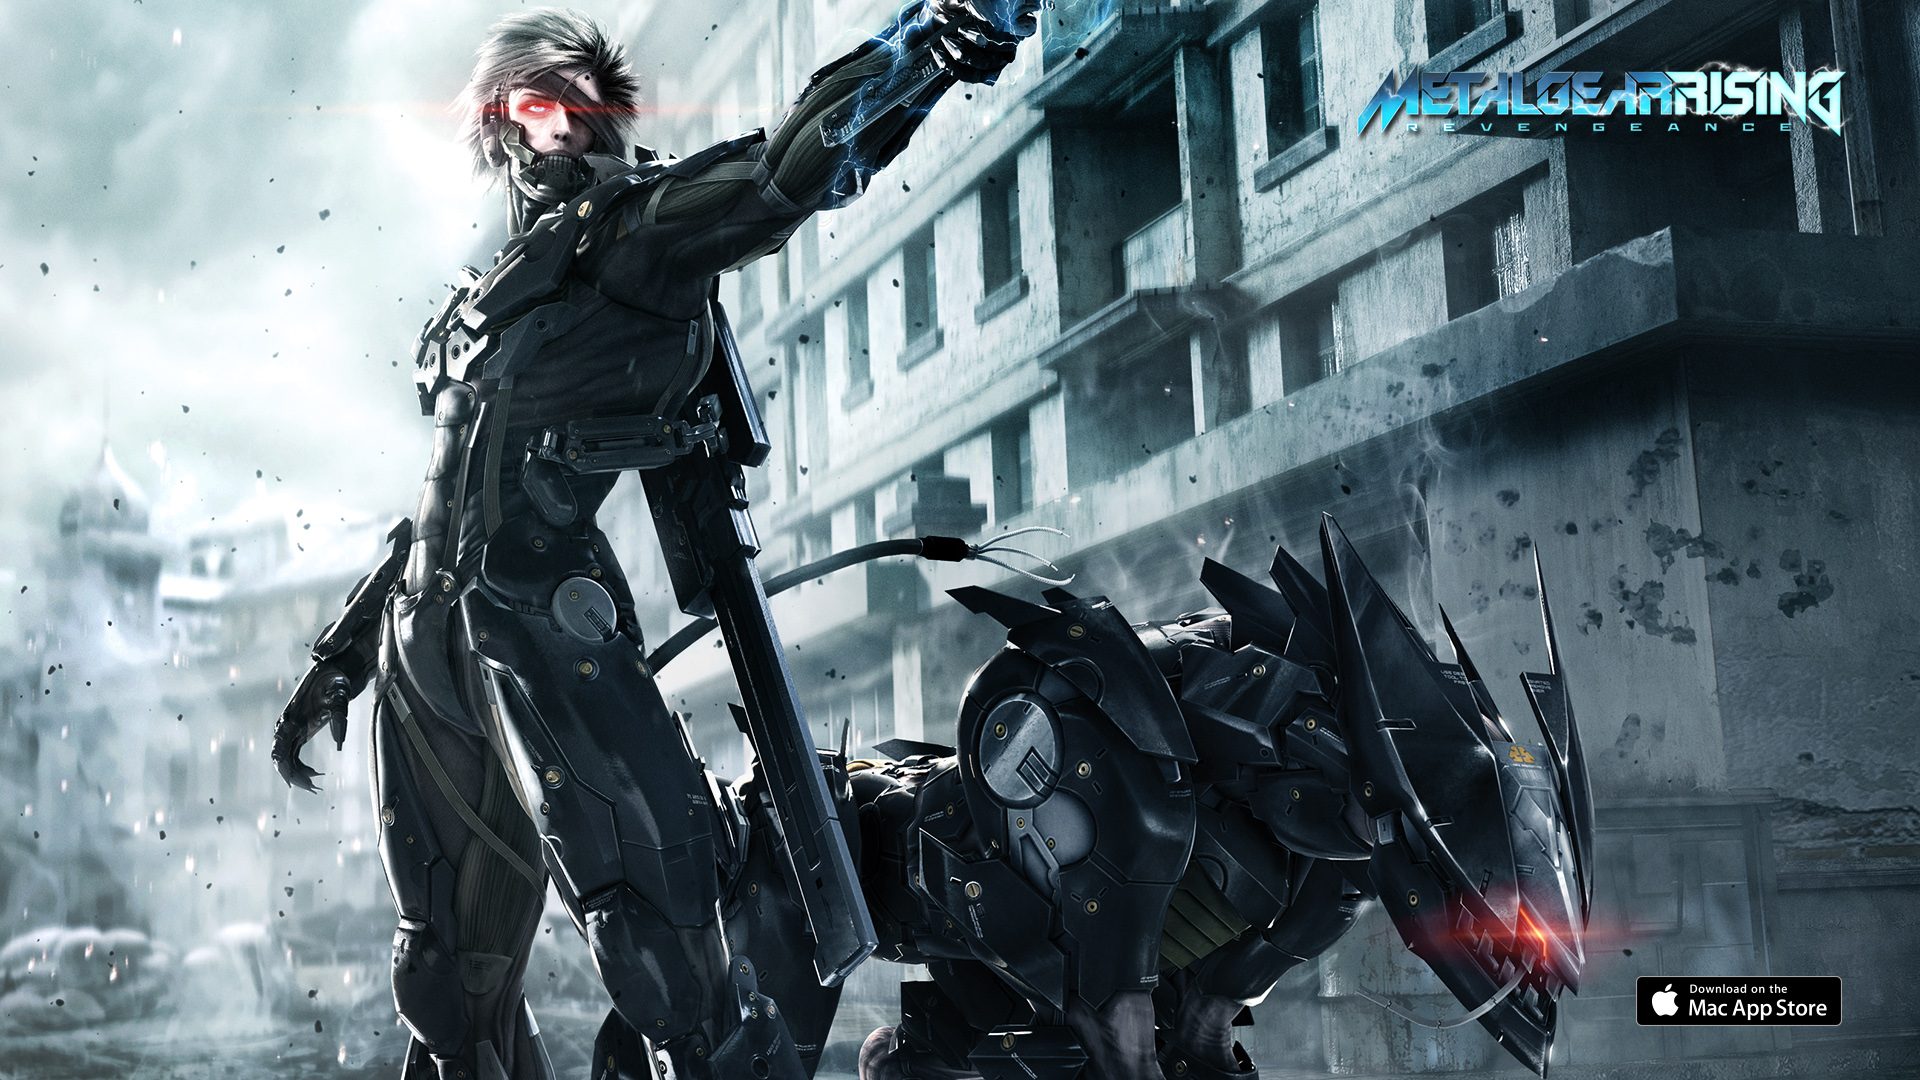 Metal Gear Rising 2 Possibly Hinted - mxdwn Games